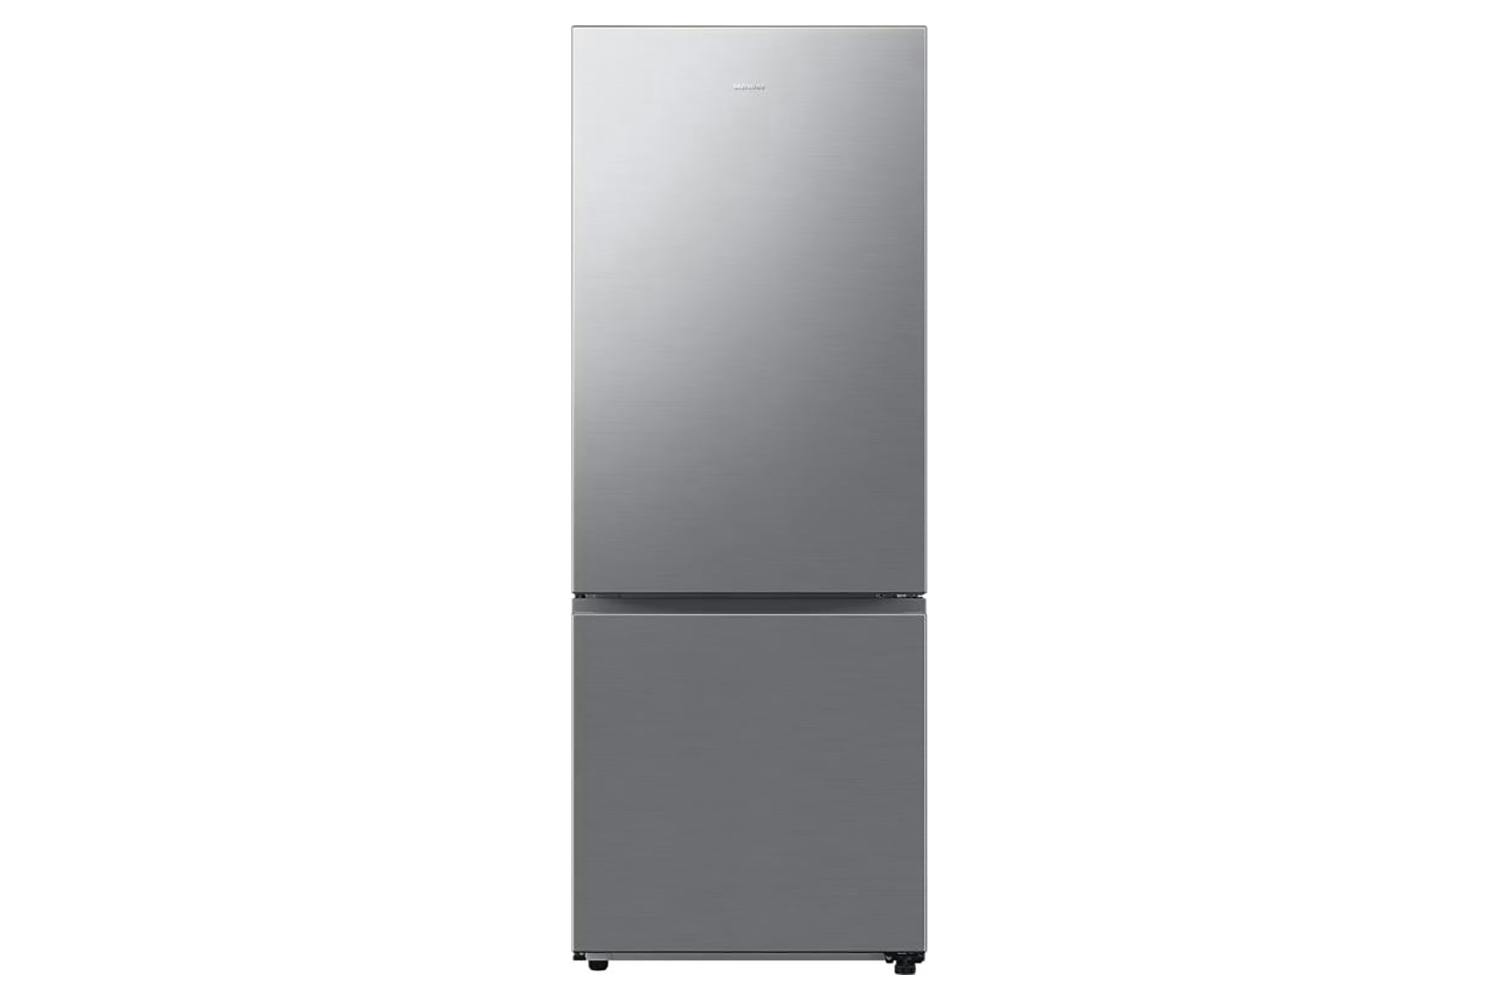 Samsung Classic Fridge Freezer with SpaceMax™ Technology - Silver